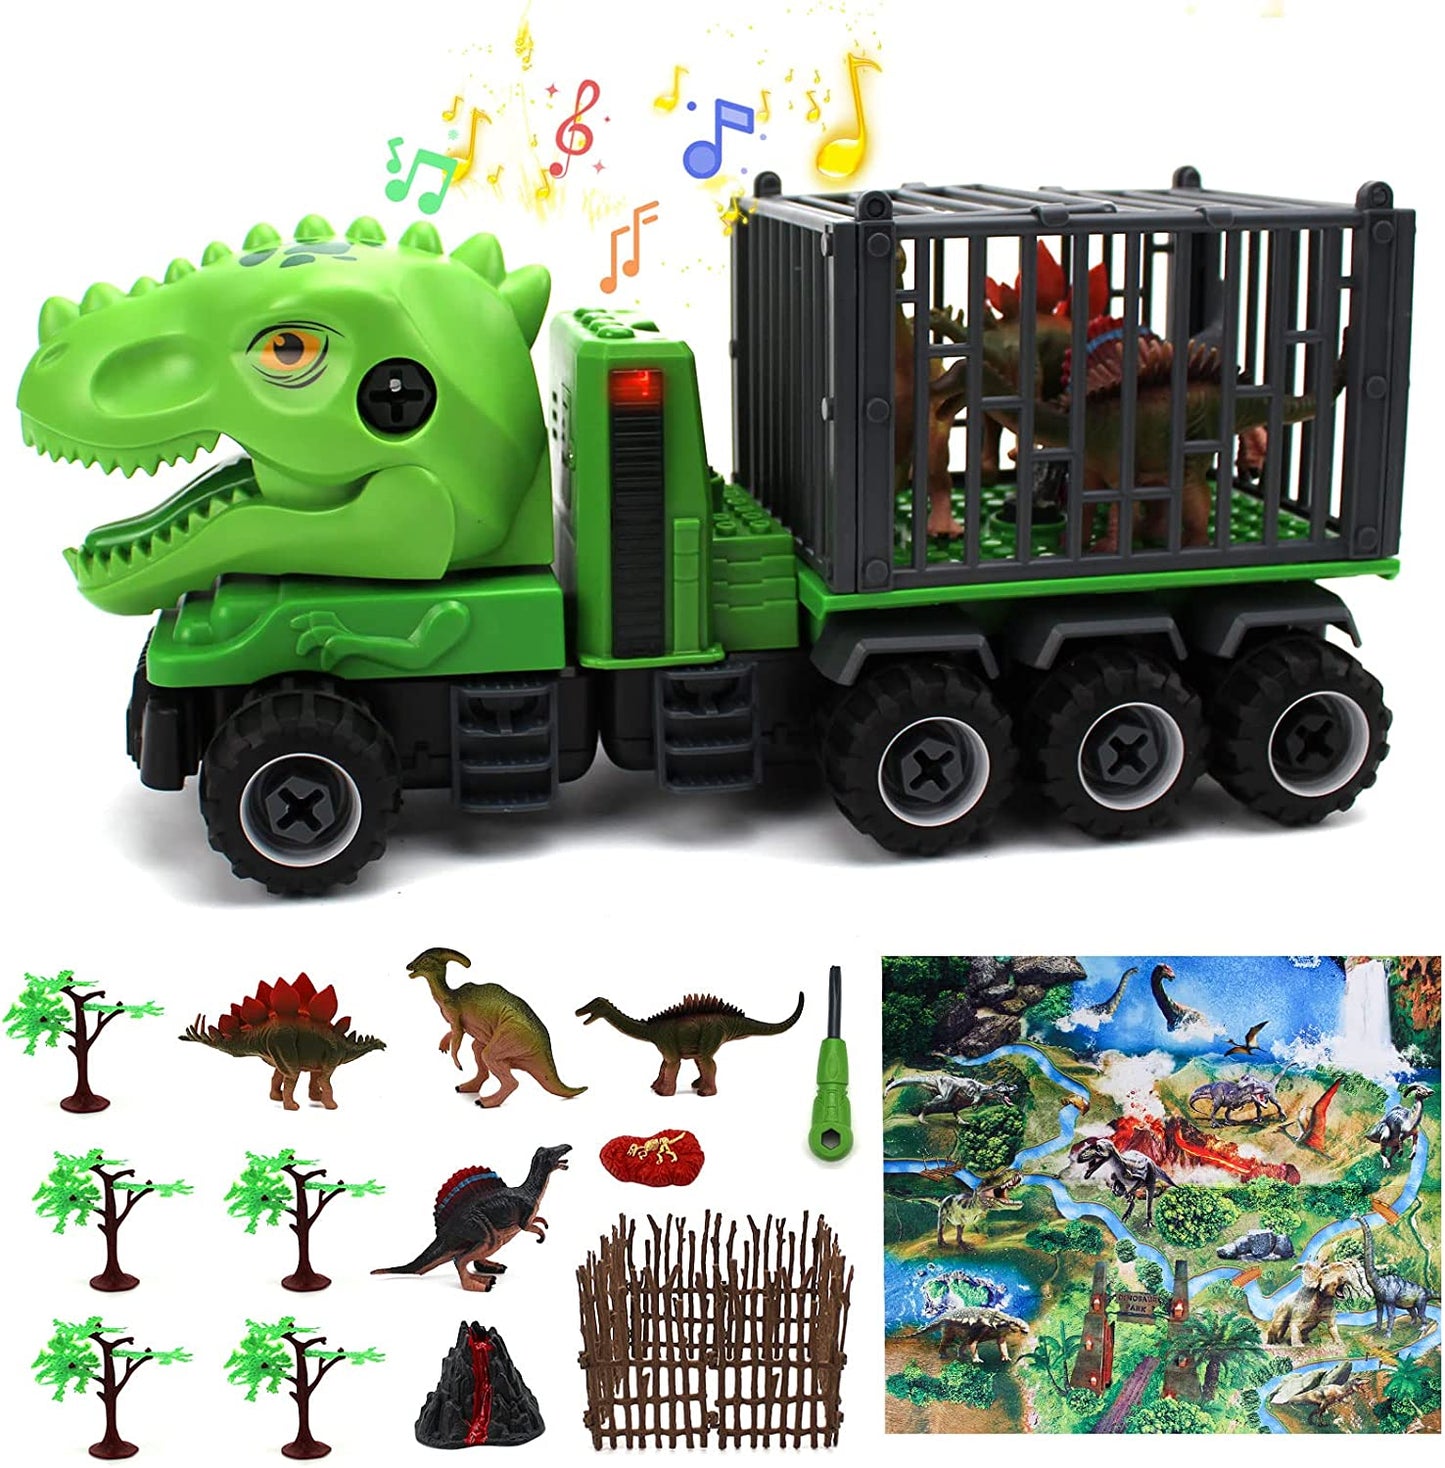 Dinosaur Truck Toy Transport Carrier for Kids with Play Mat, Lights, Sounds Realistic Dinosaurs, Take Apart Monster Dino Car Truck STEM Toys Christmas Birthday Gift for Boys Grils